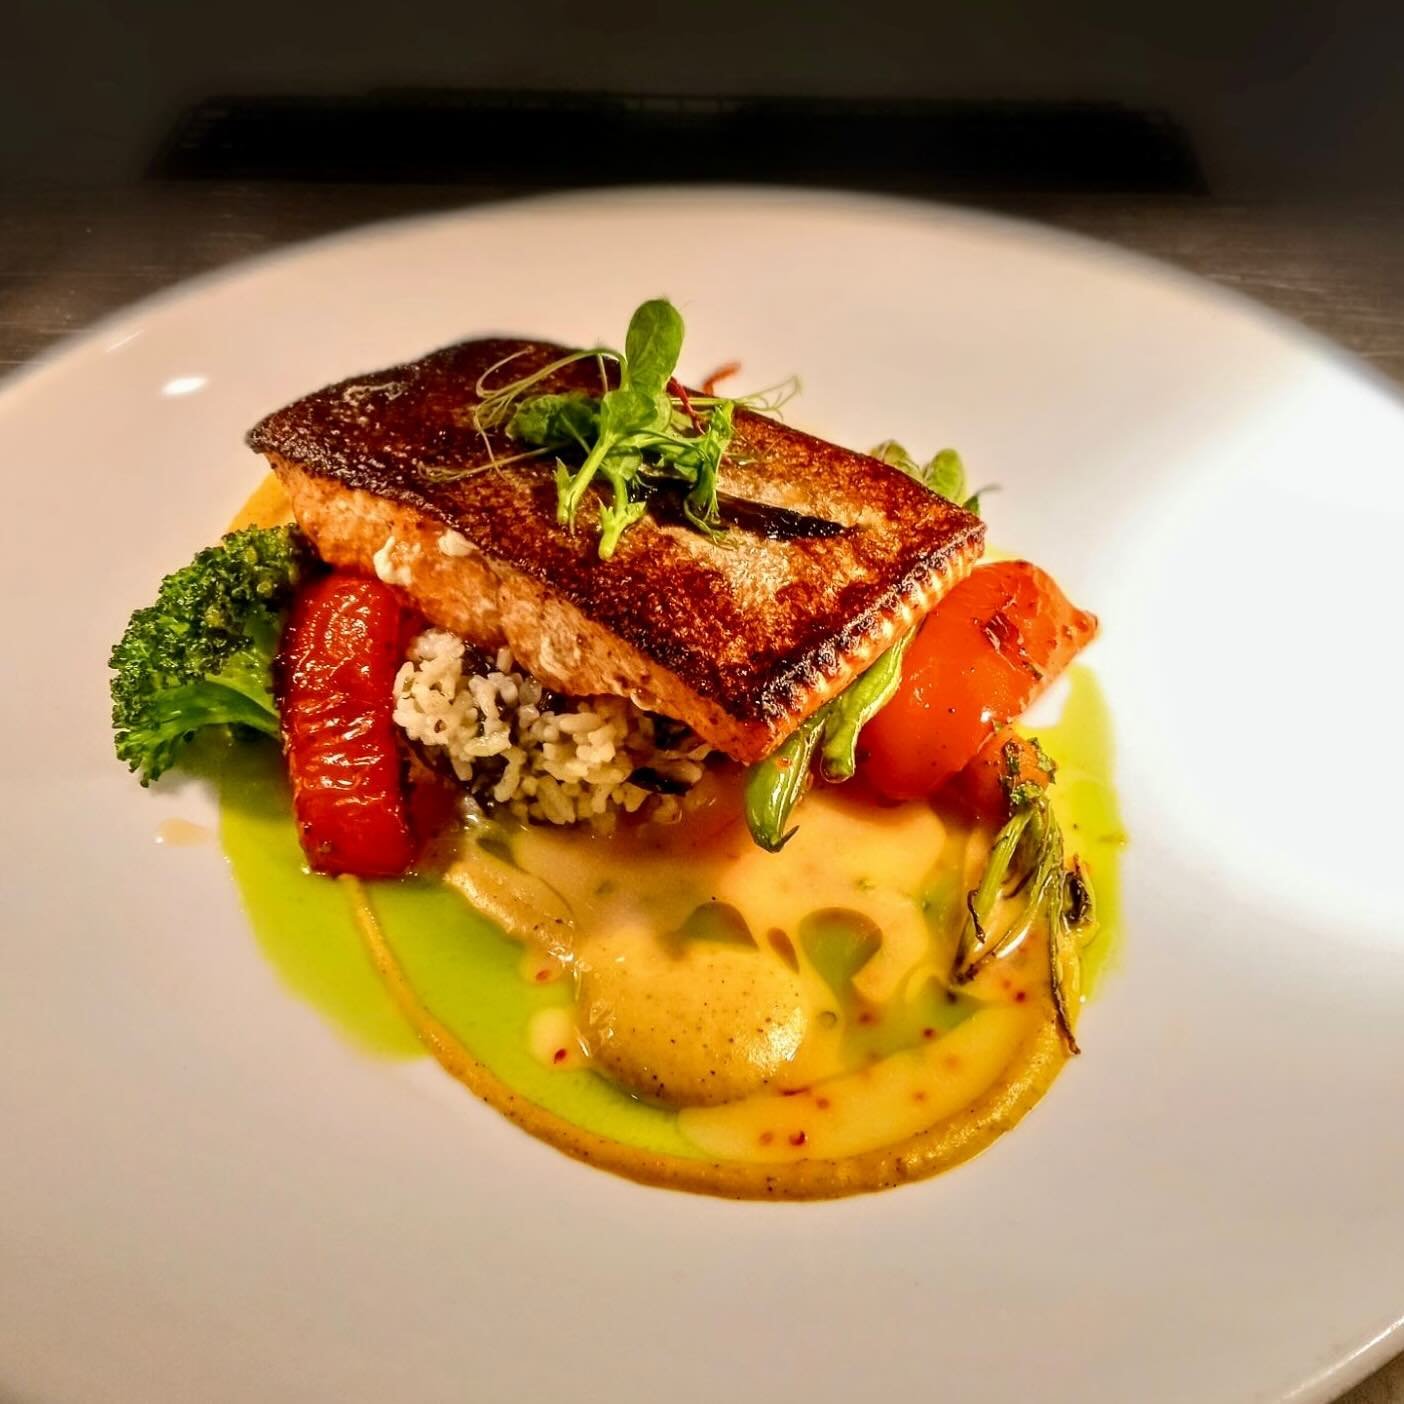 SATURDAY NIGHT SPECIAL

A fresh-sheet feature for tonight from our Head Chef Darrel Ahenakew, who took some inspiration from his indigenous background and culinary skills to create this dish that&rsquo;s every bit as pleasing to the eye as the palate